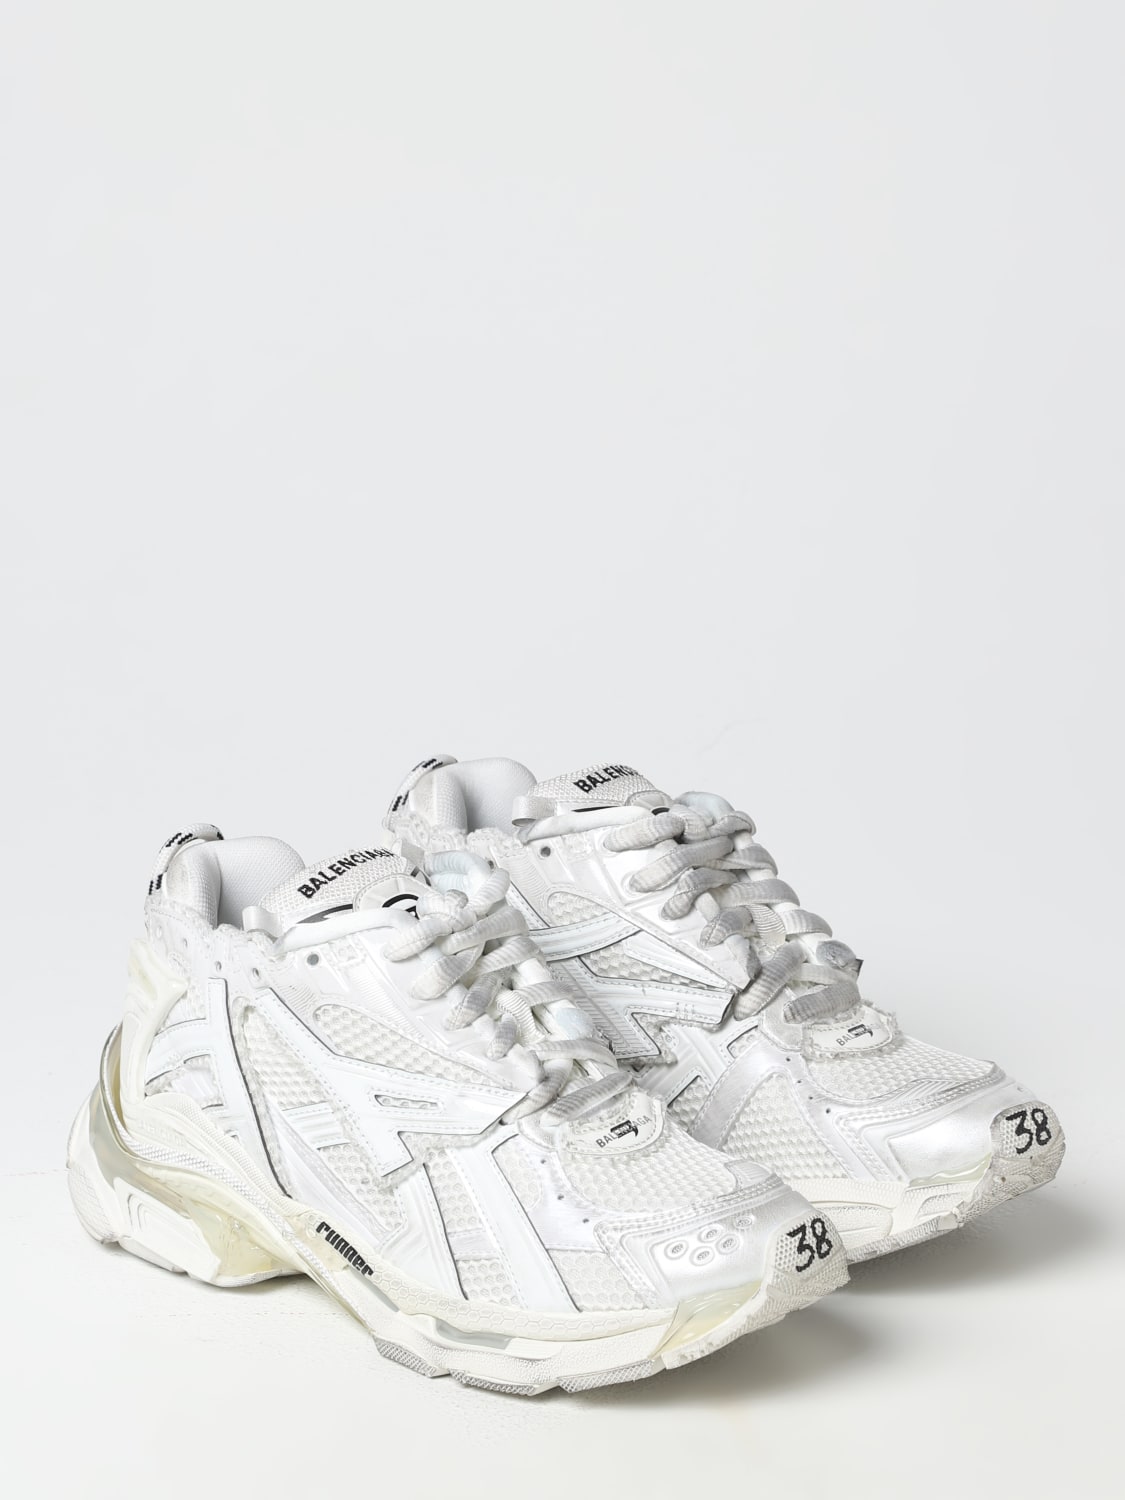 læsning Egern Sydamerika BALENCIAGA: Runner sneakers in used mesh and rubber - White | Balenciaga  sneakers 677402W3RB1 online at GIGLIO.COM